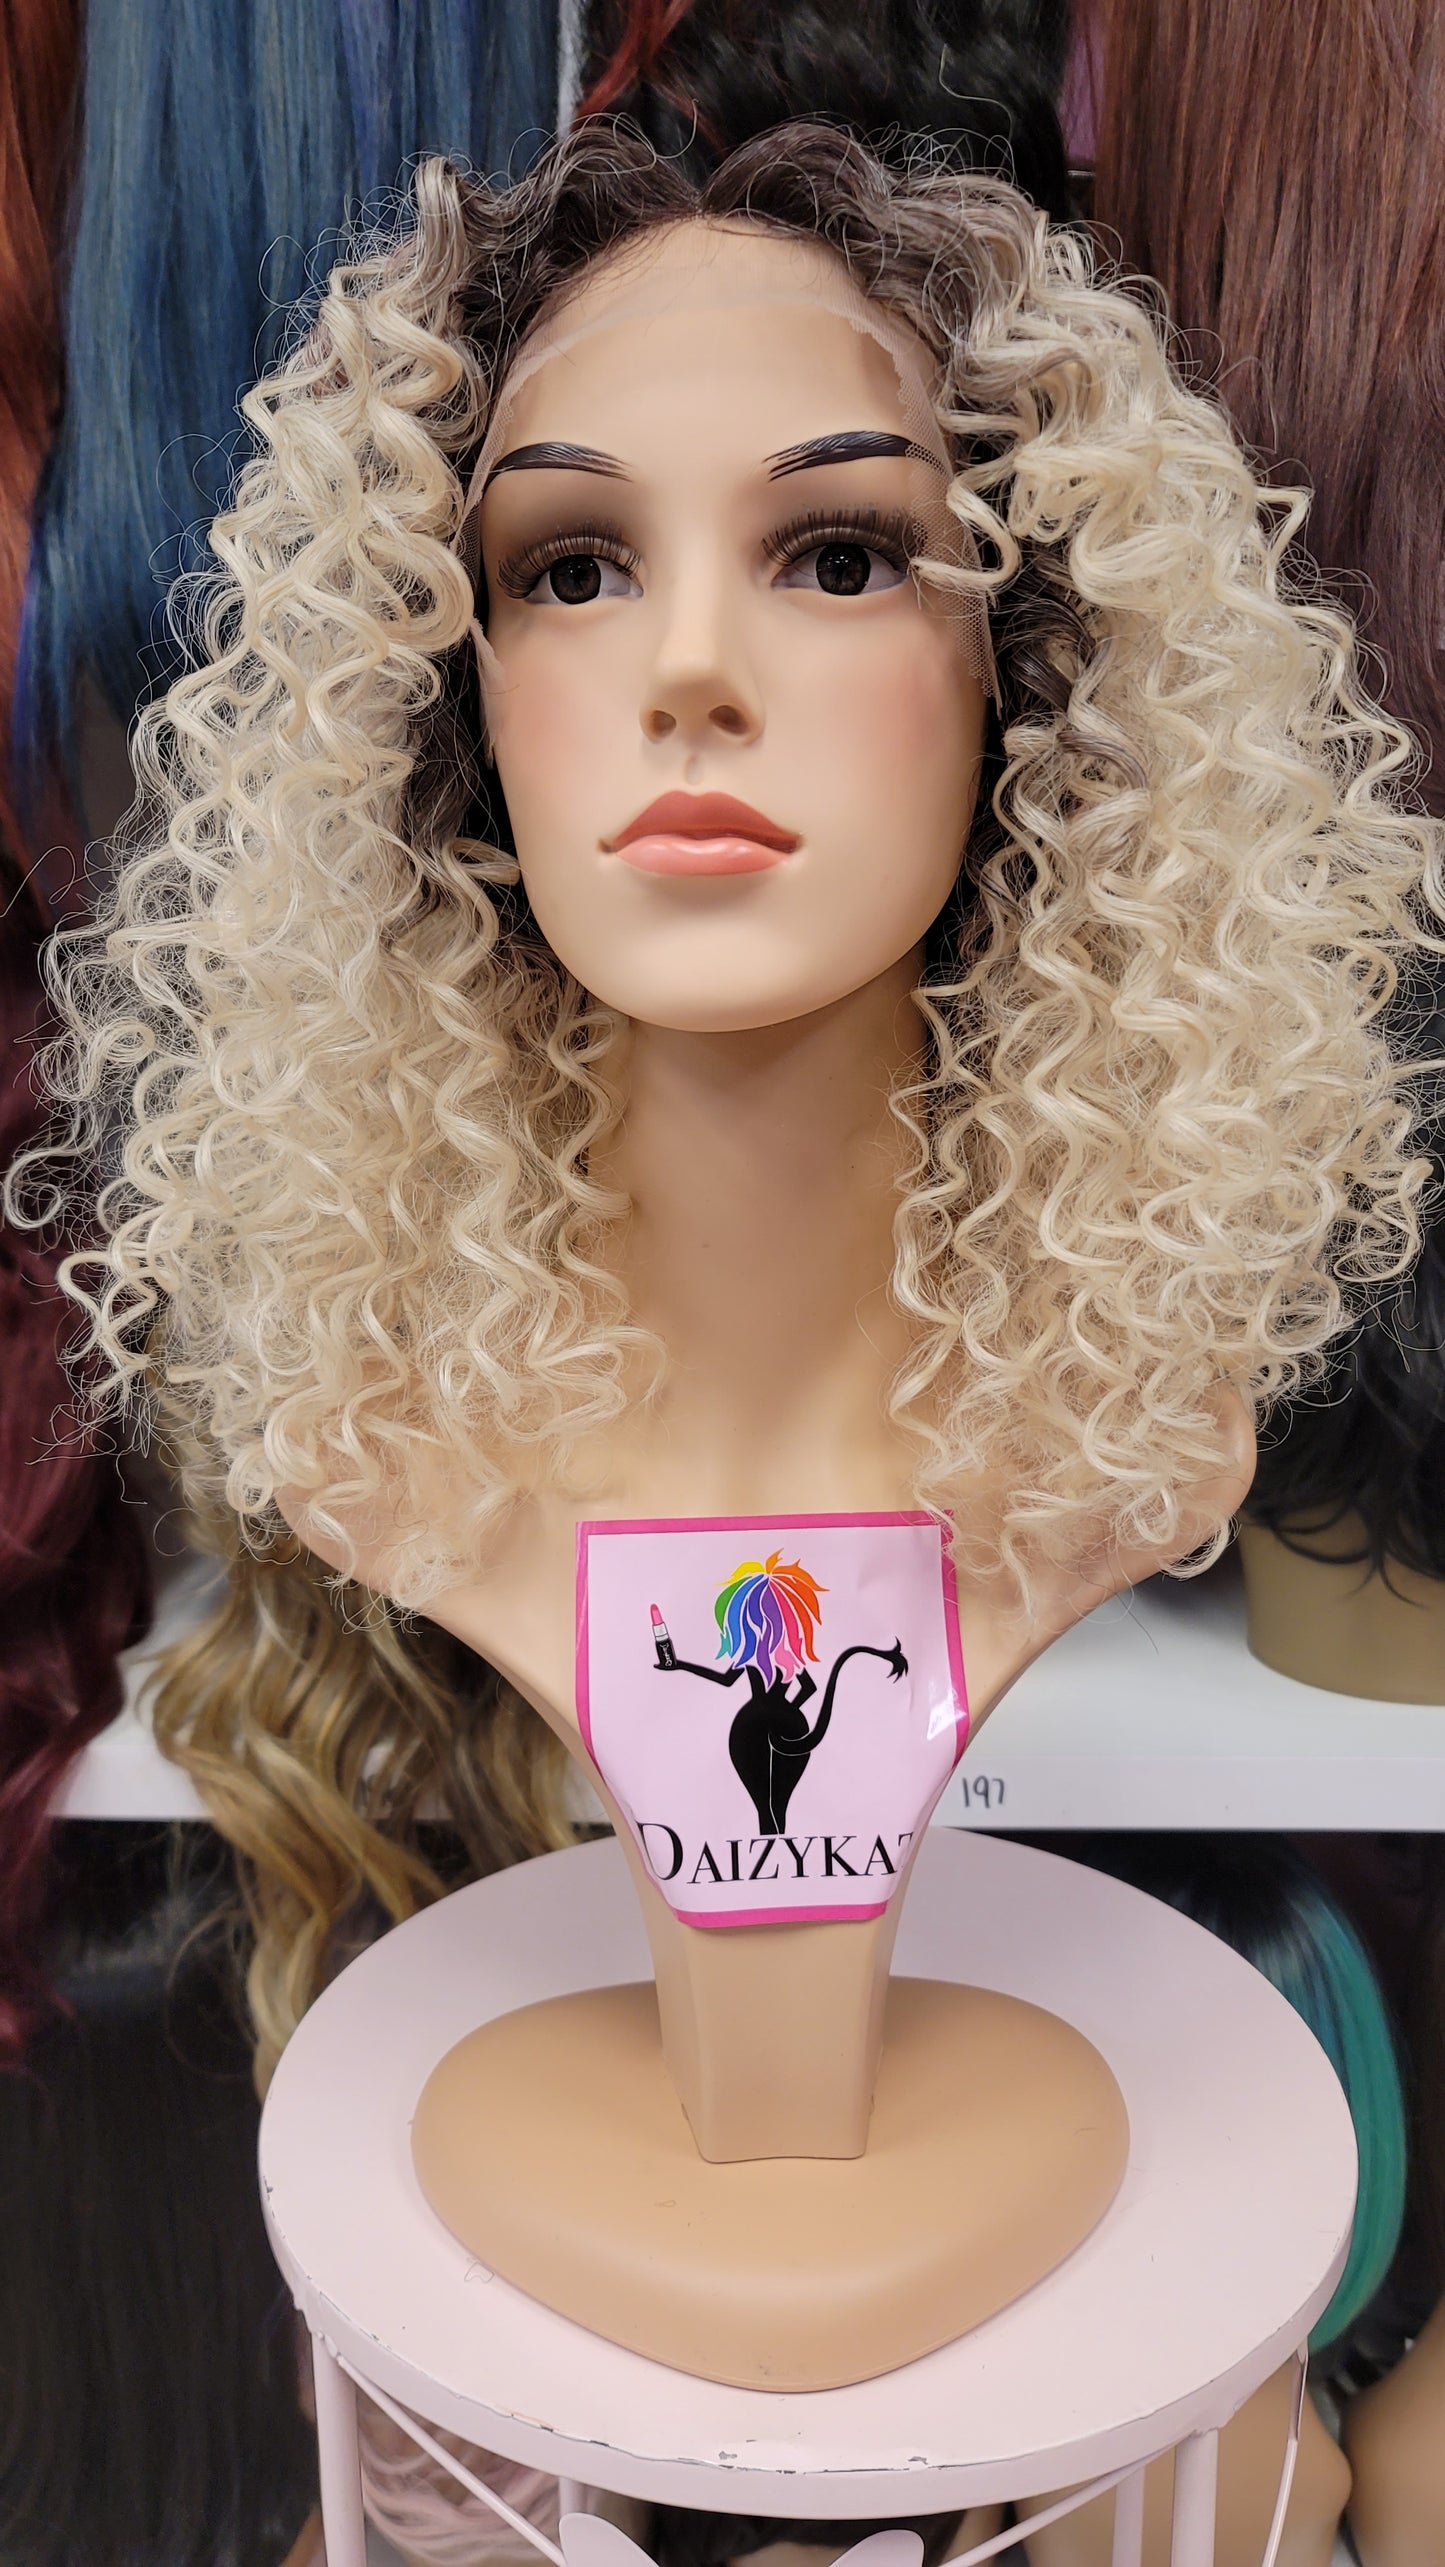 53 LUPE - Middle Part Lace Front Wig - 4/BLONDE - DaizyKat Cosmetics 53 LUPE - Middle Part Lace Front Wig - 4/BLONDE DaizyKat Cosmetics Wigs